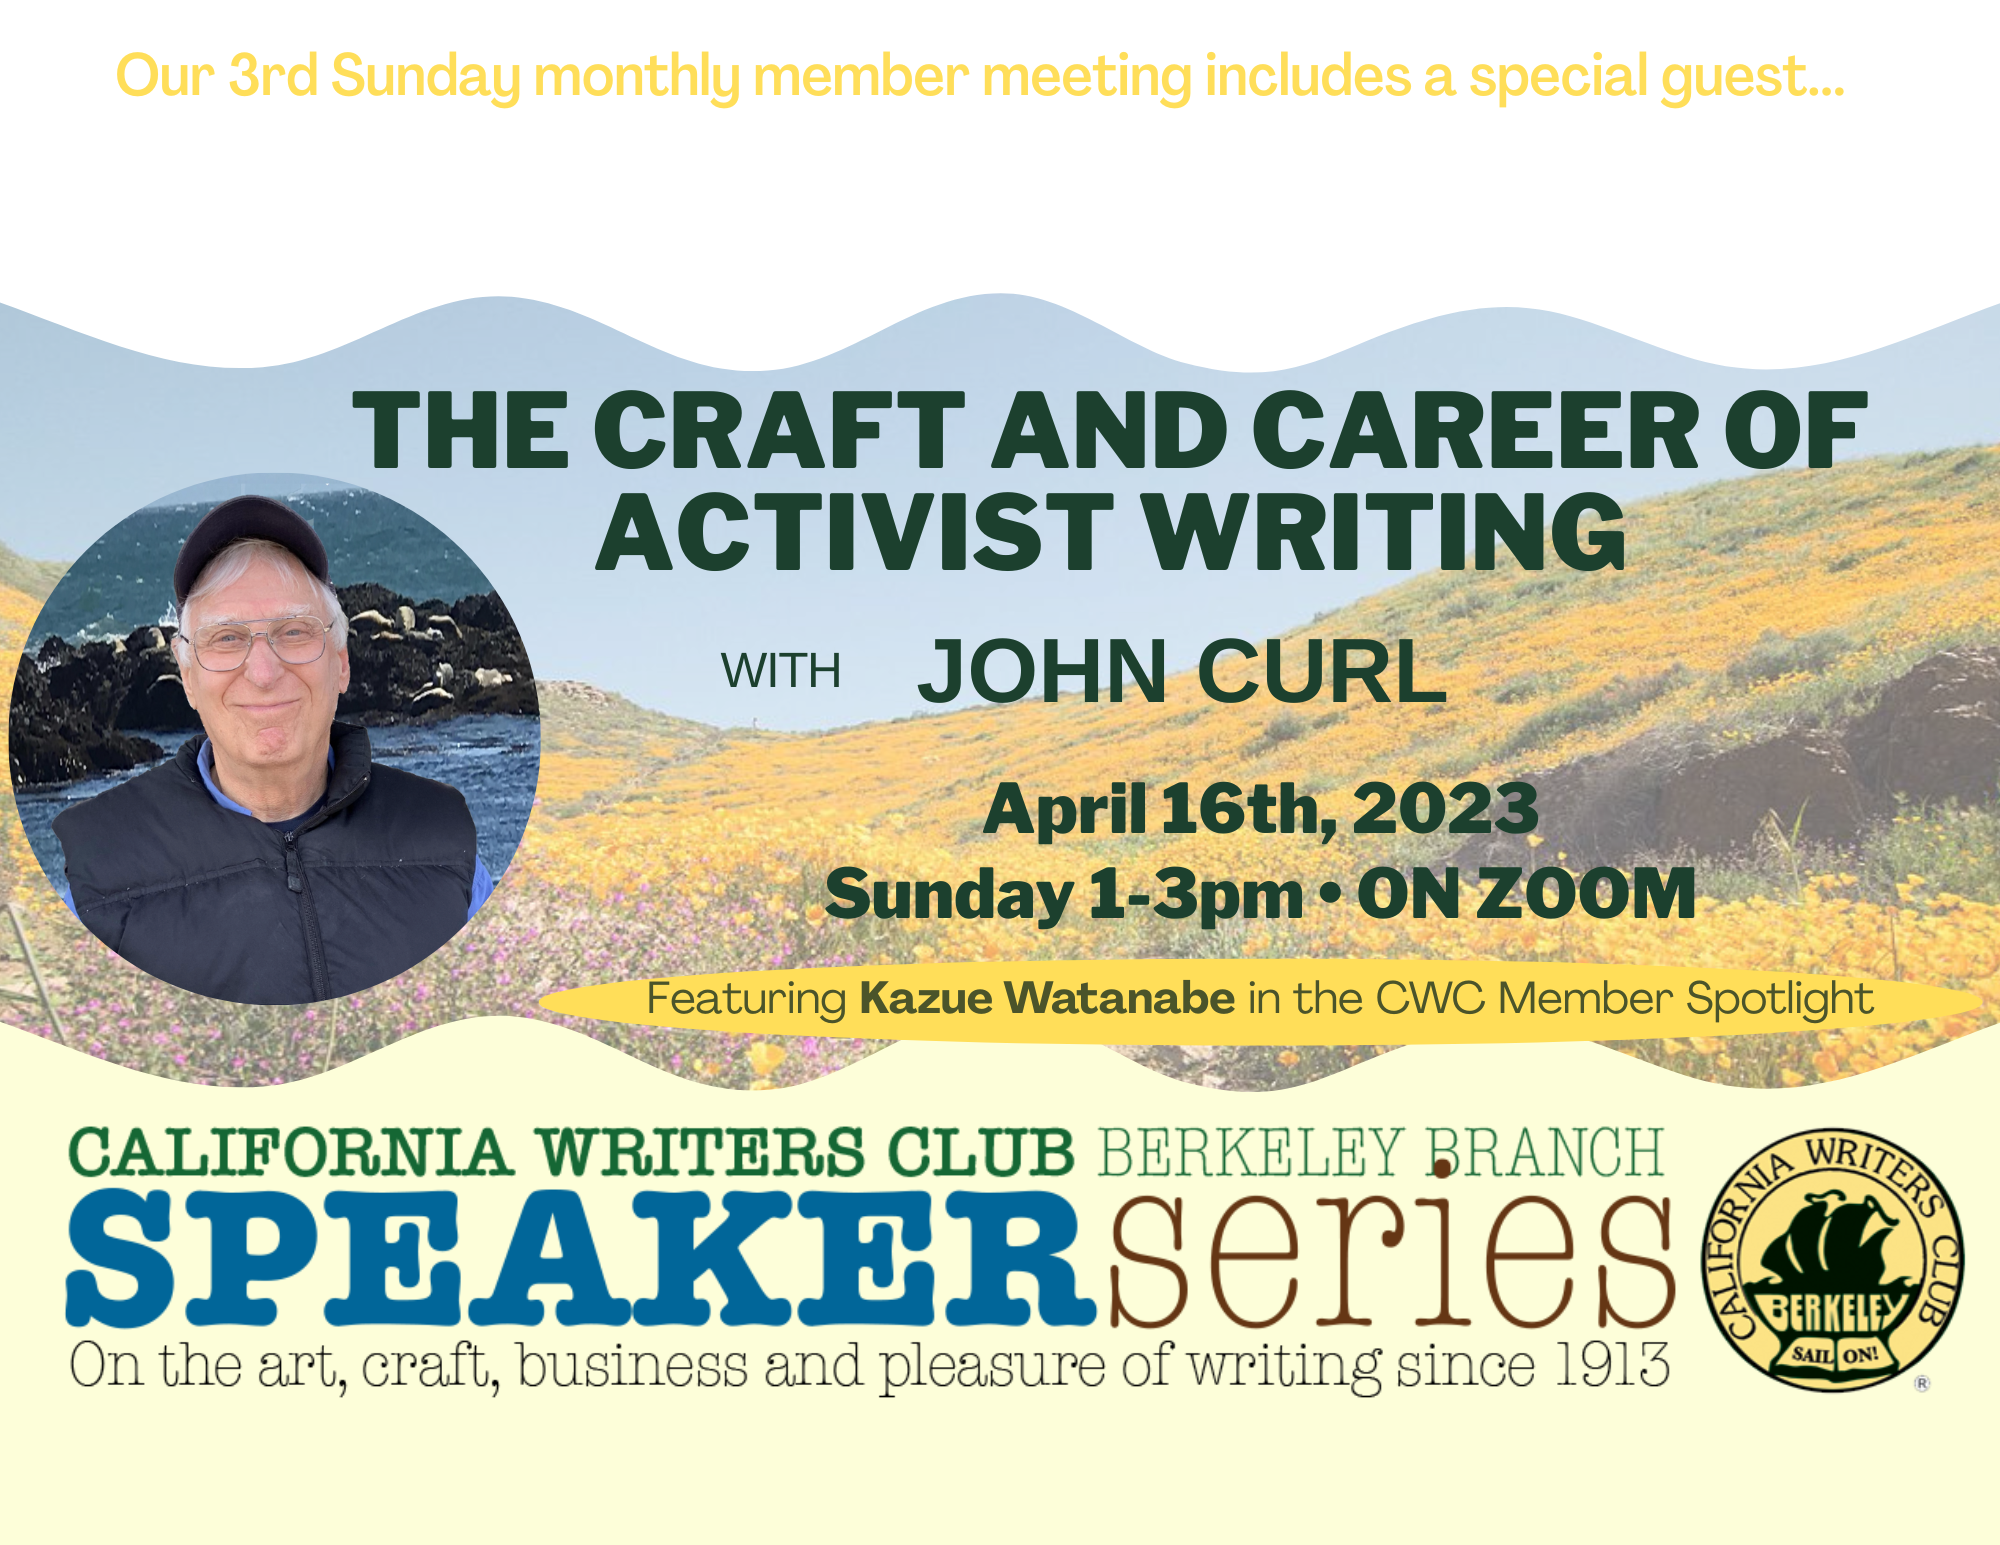 “The Craft and Career of Activist Writing” with John Curl on April 16th, 2023